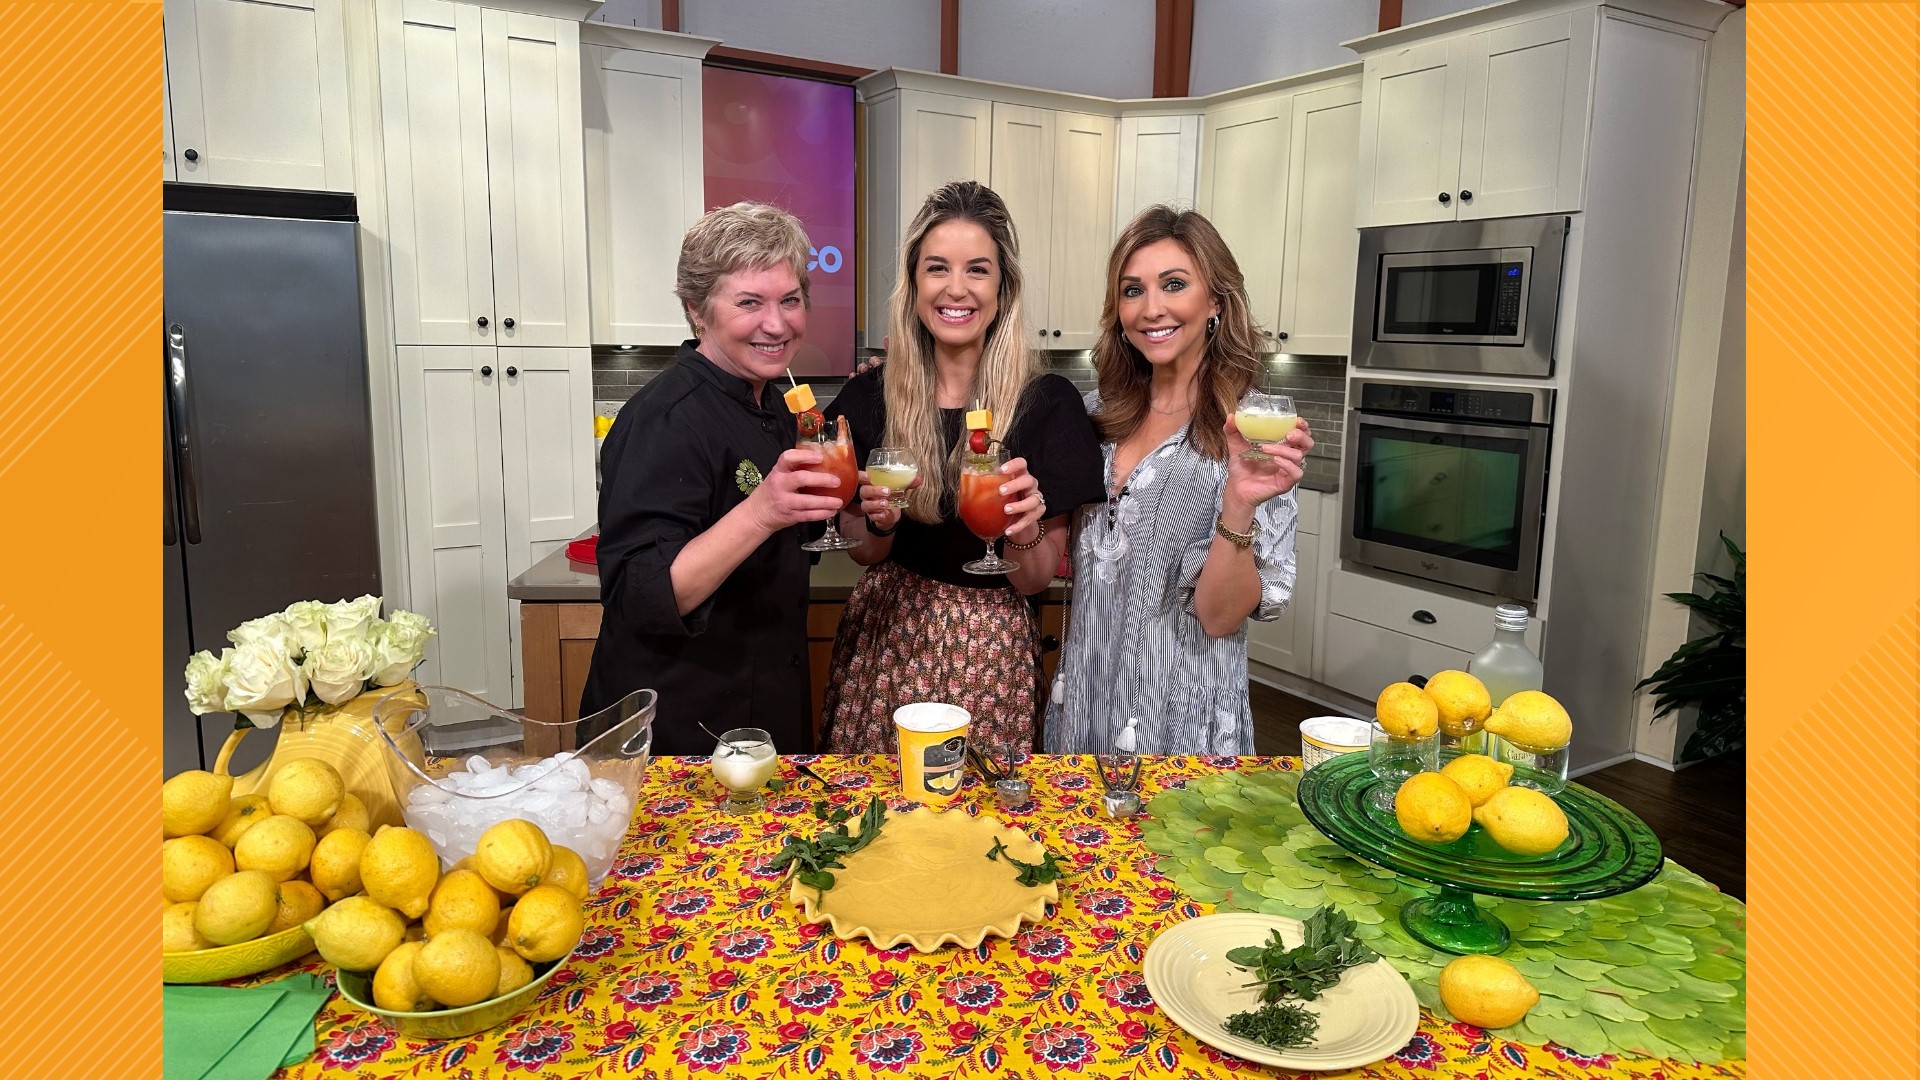 Chef Nancy Waldeck has your go-to Bloody Mary and a sweet Limoncello Parfait to celebrate National Cocktail Day.